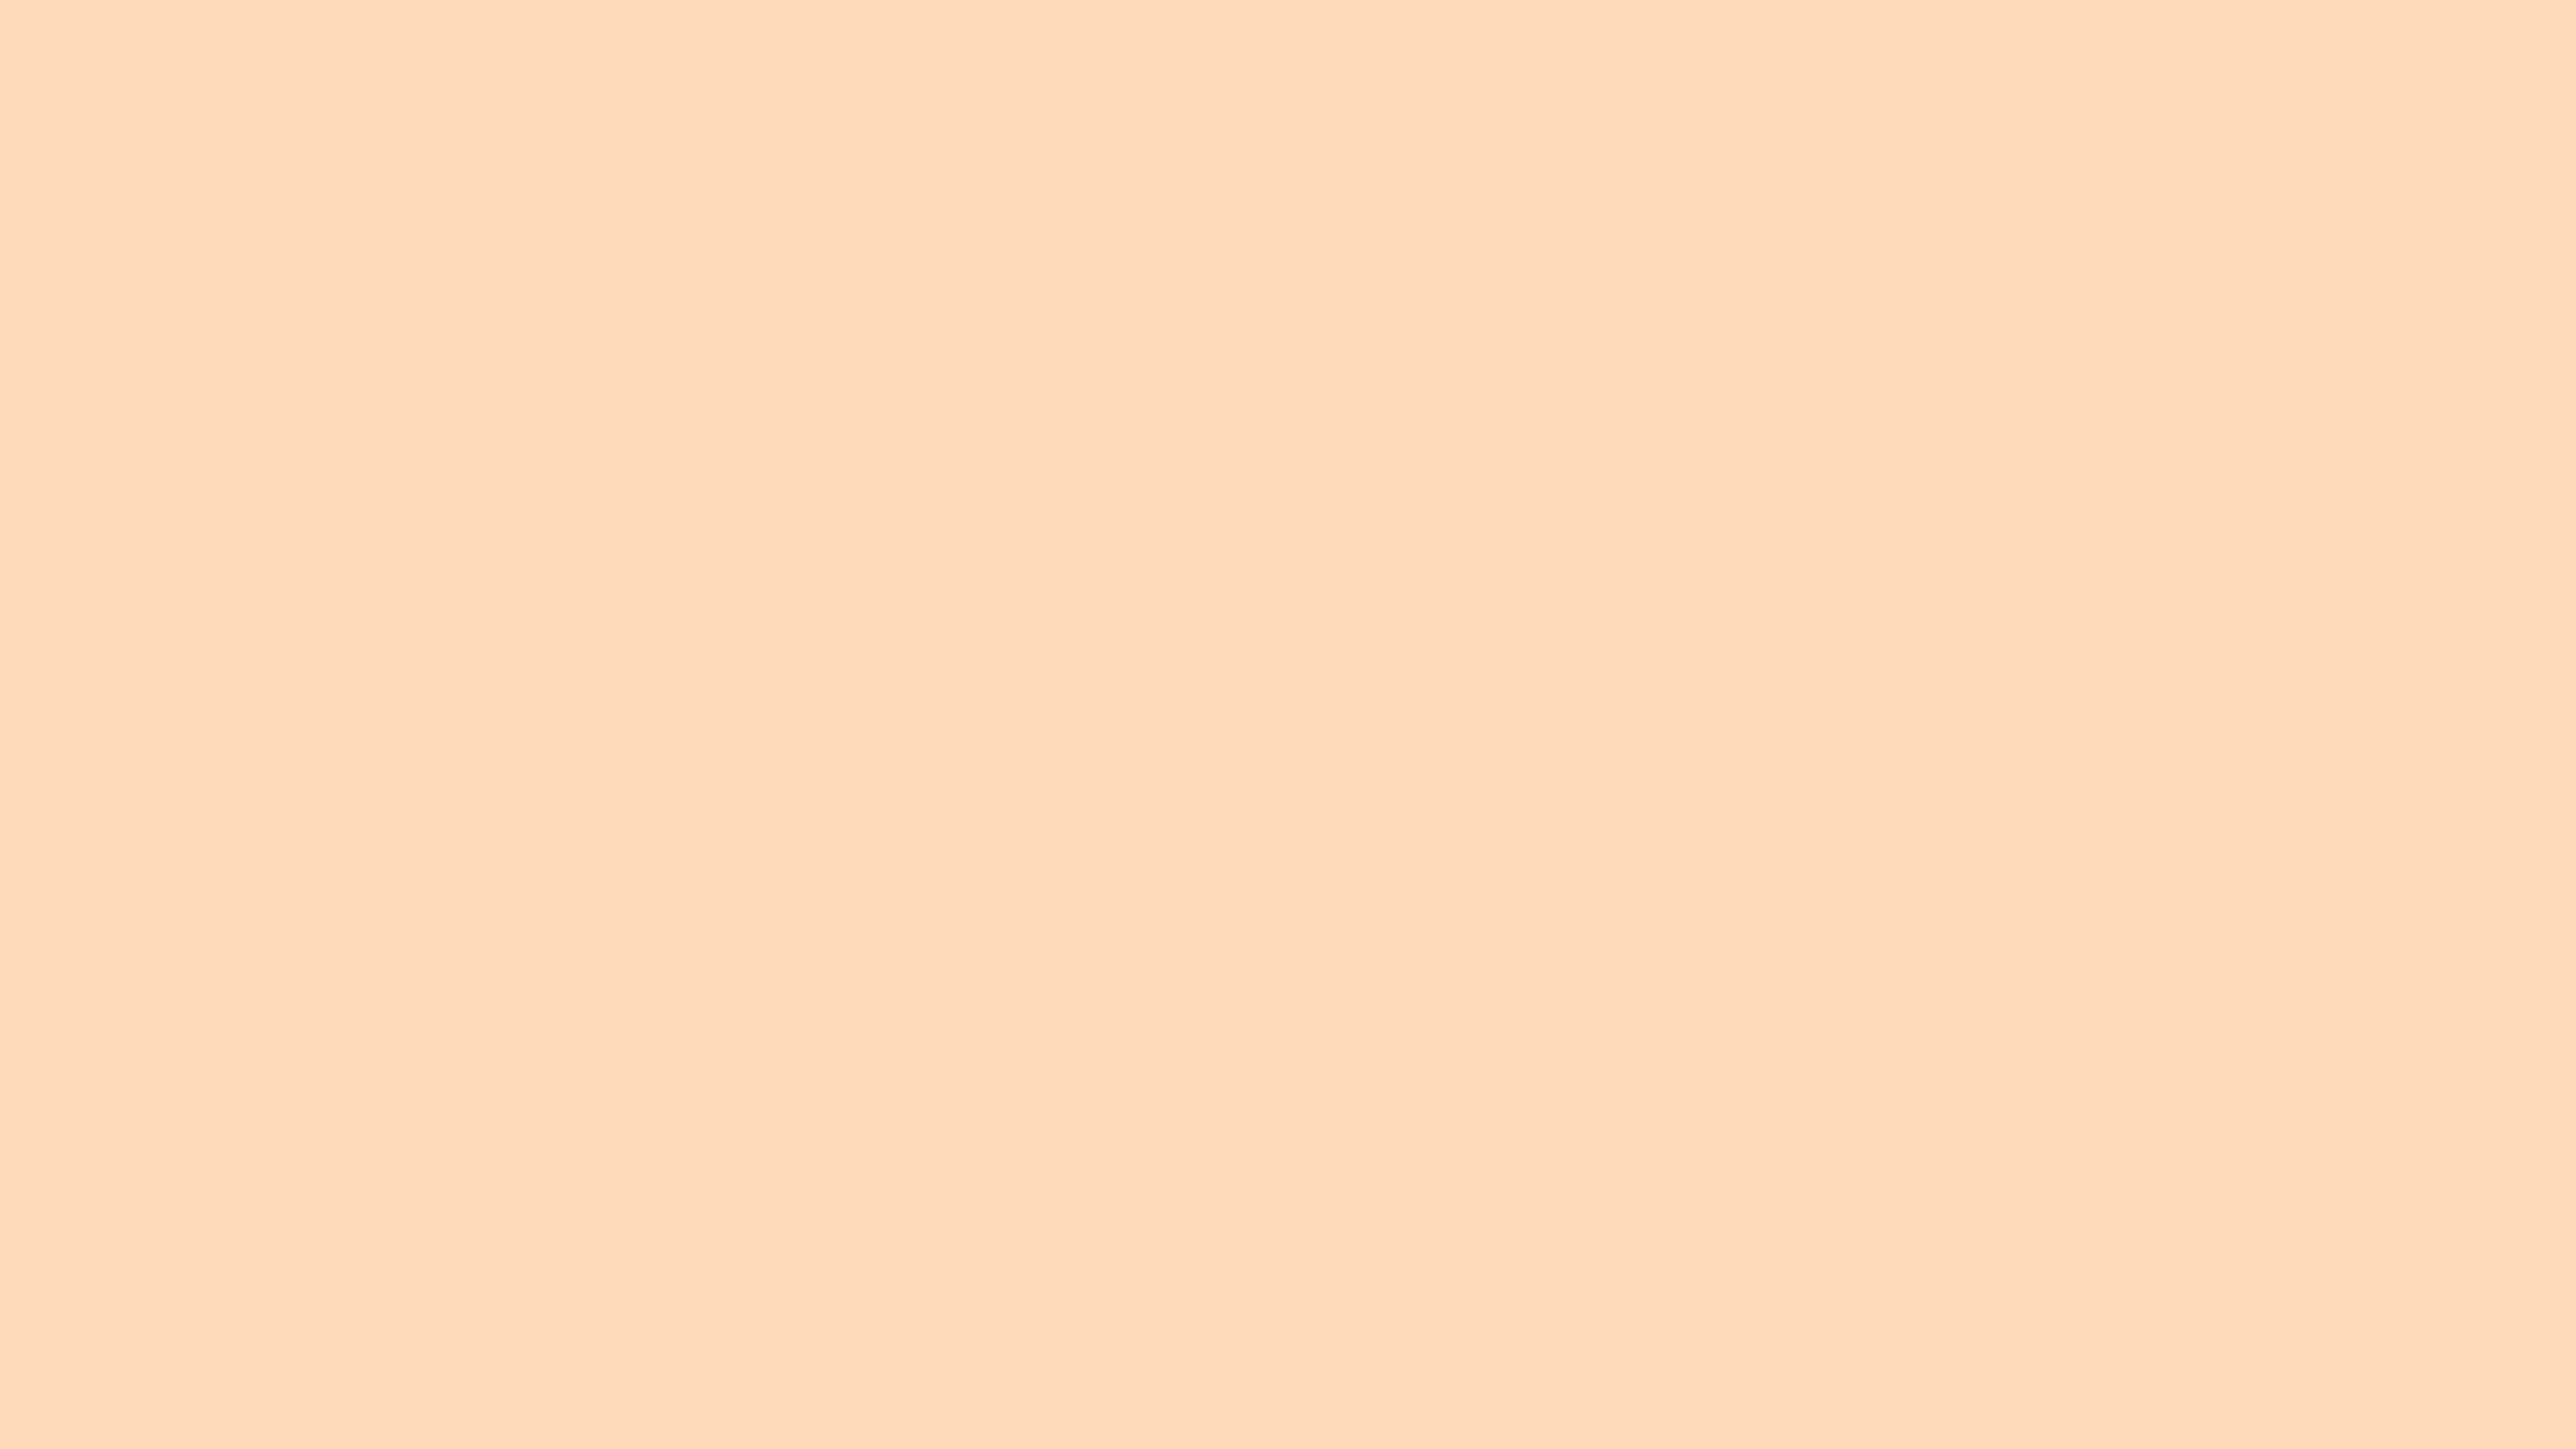 7680x4320 Peach Puff Solid Color Background